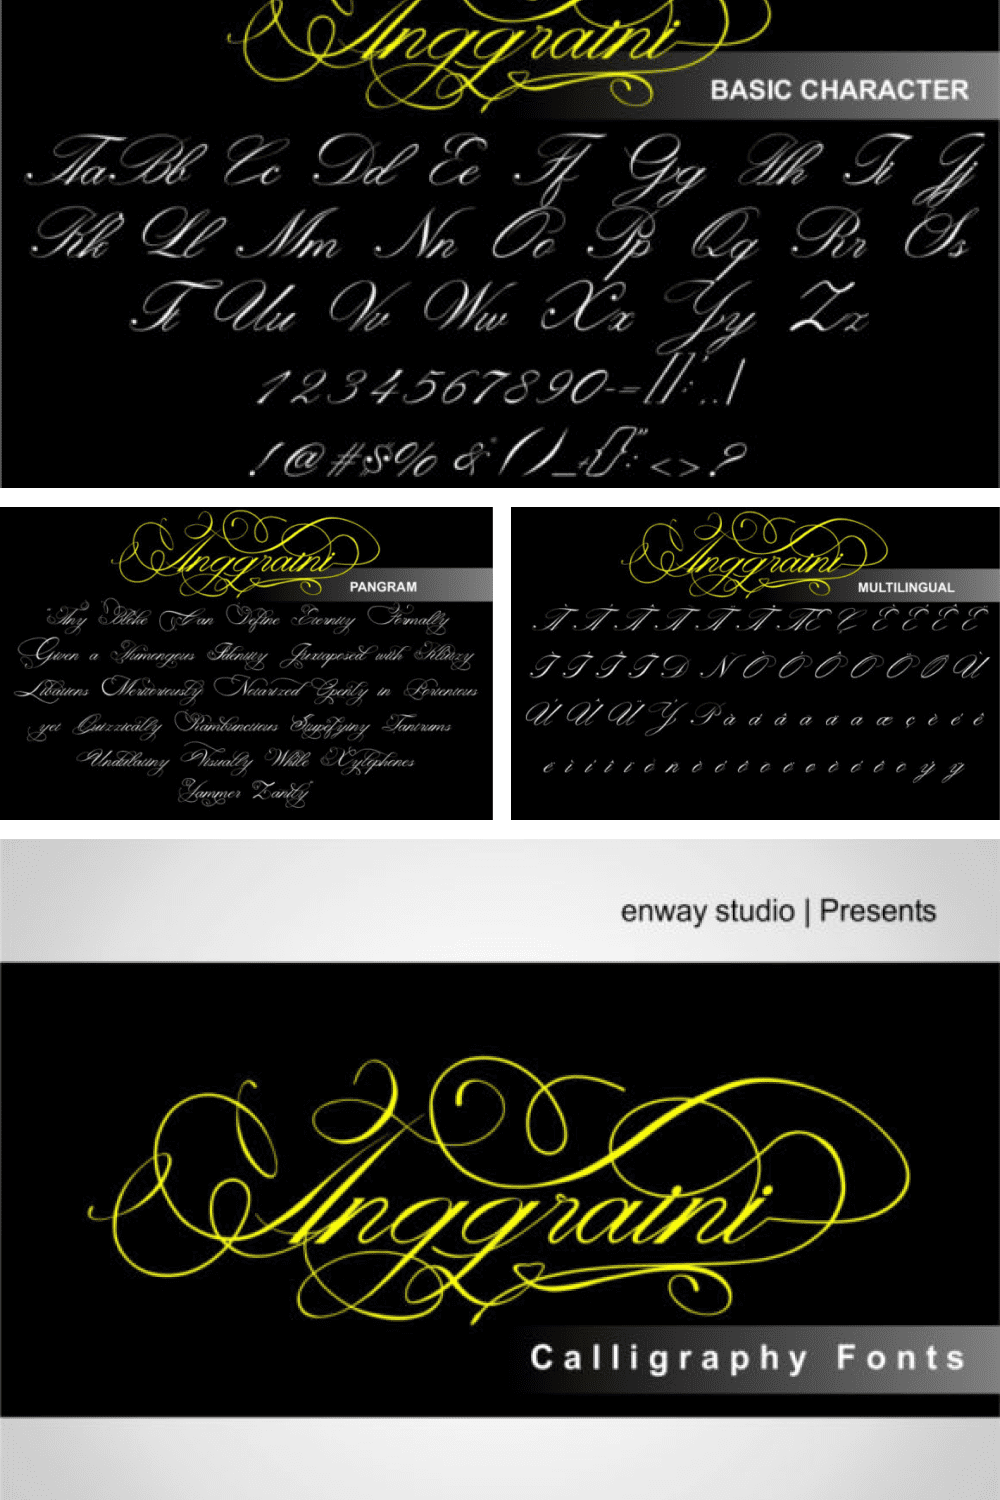 This font is a beautiful, charming and modern handwritten font.